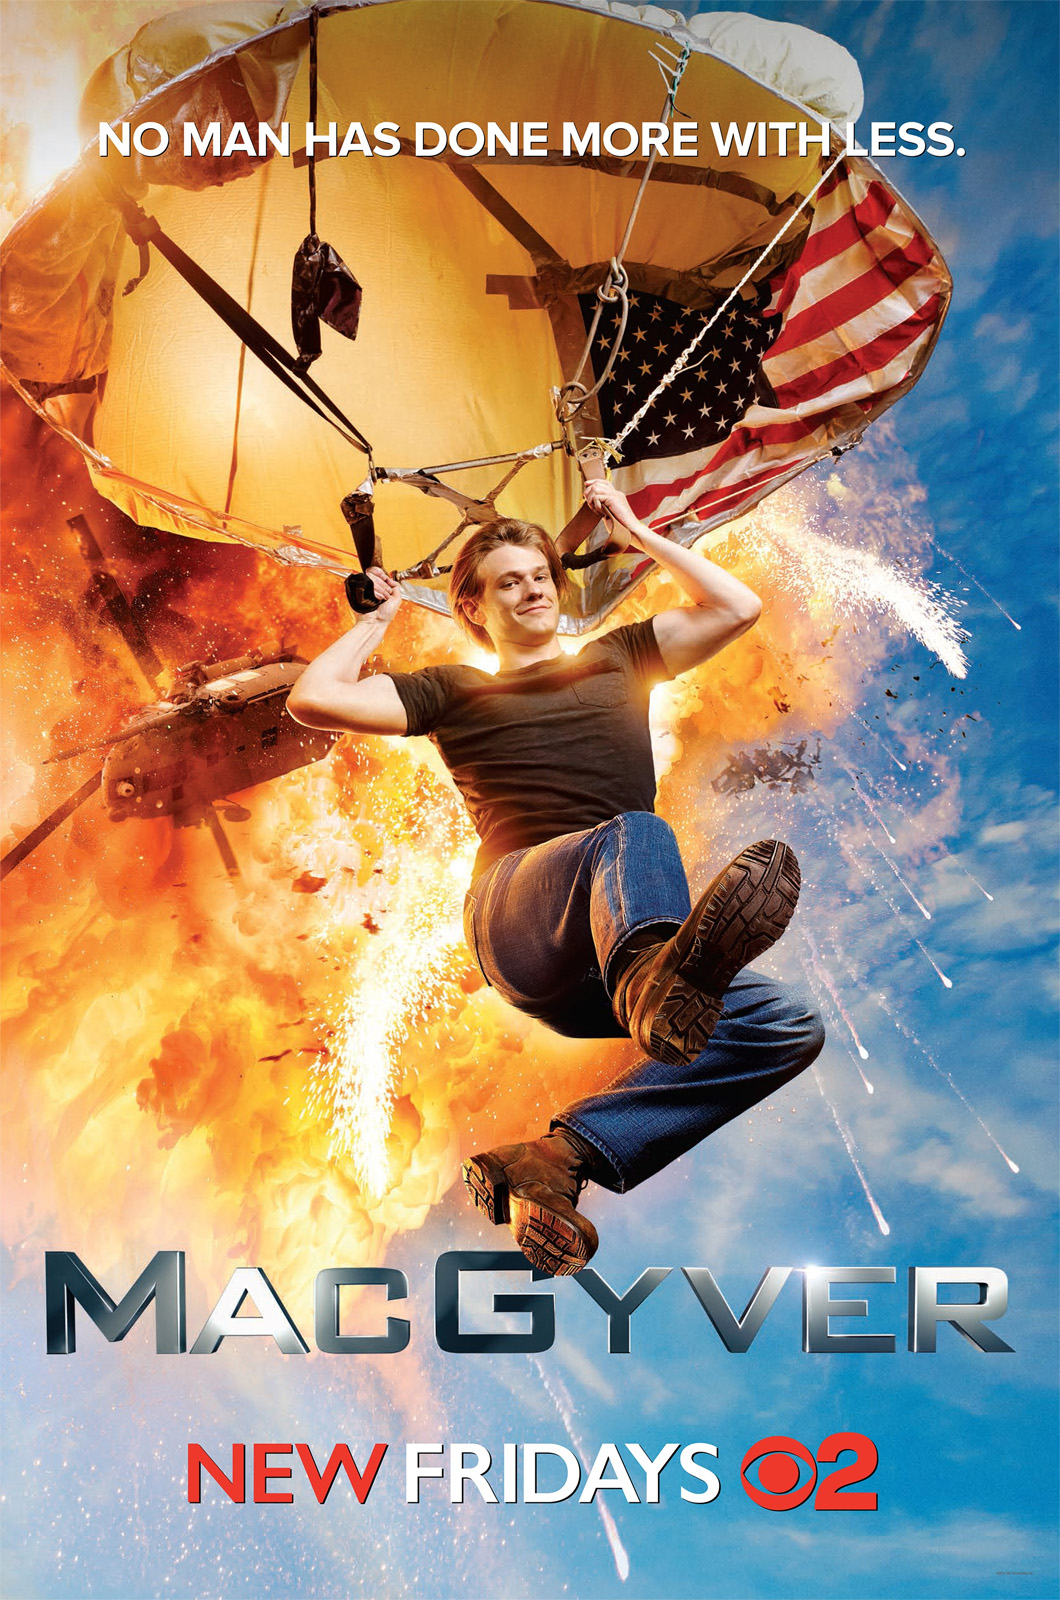 MacGyver (2016) S02E23 FINAL FRENCH HDTV